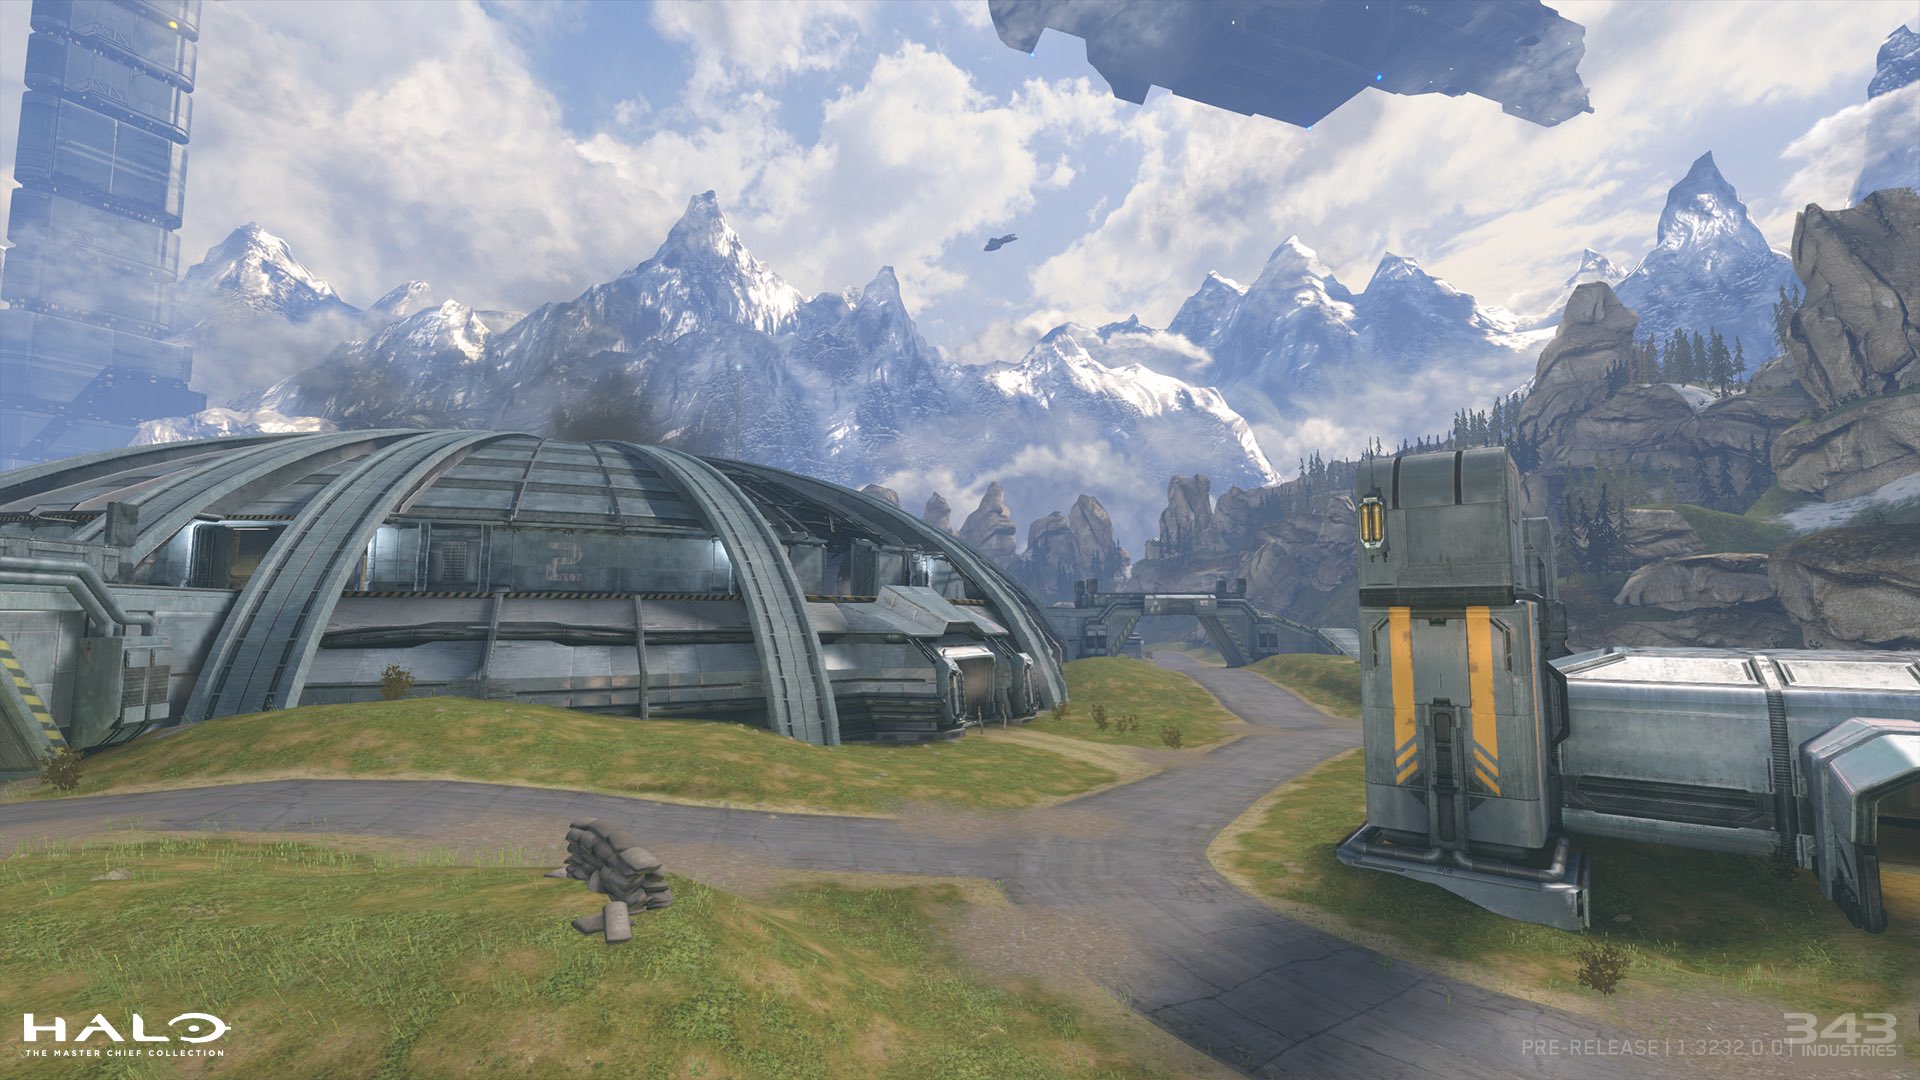 Halo: The Master Chief Collection Update Adds Cut Content, But